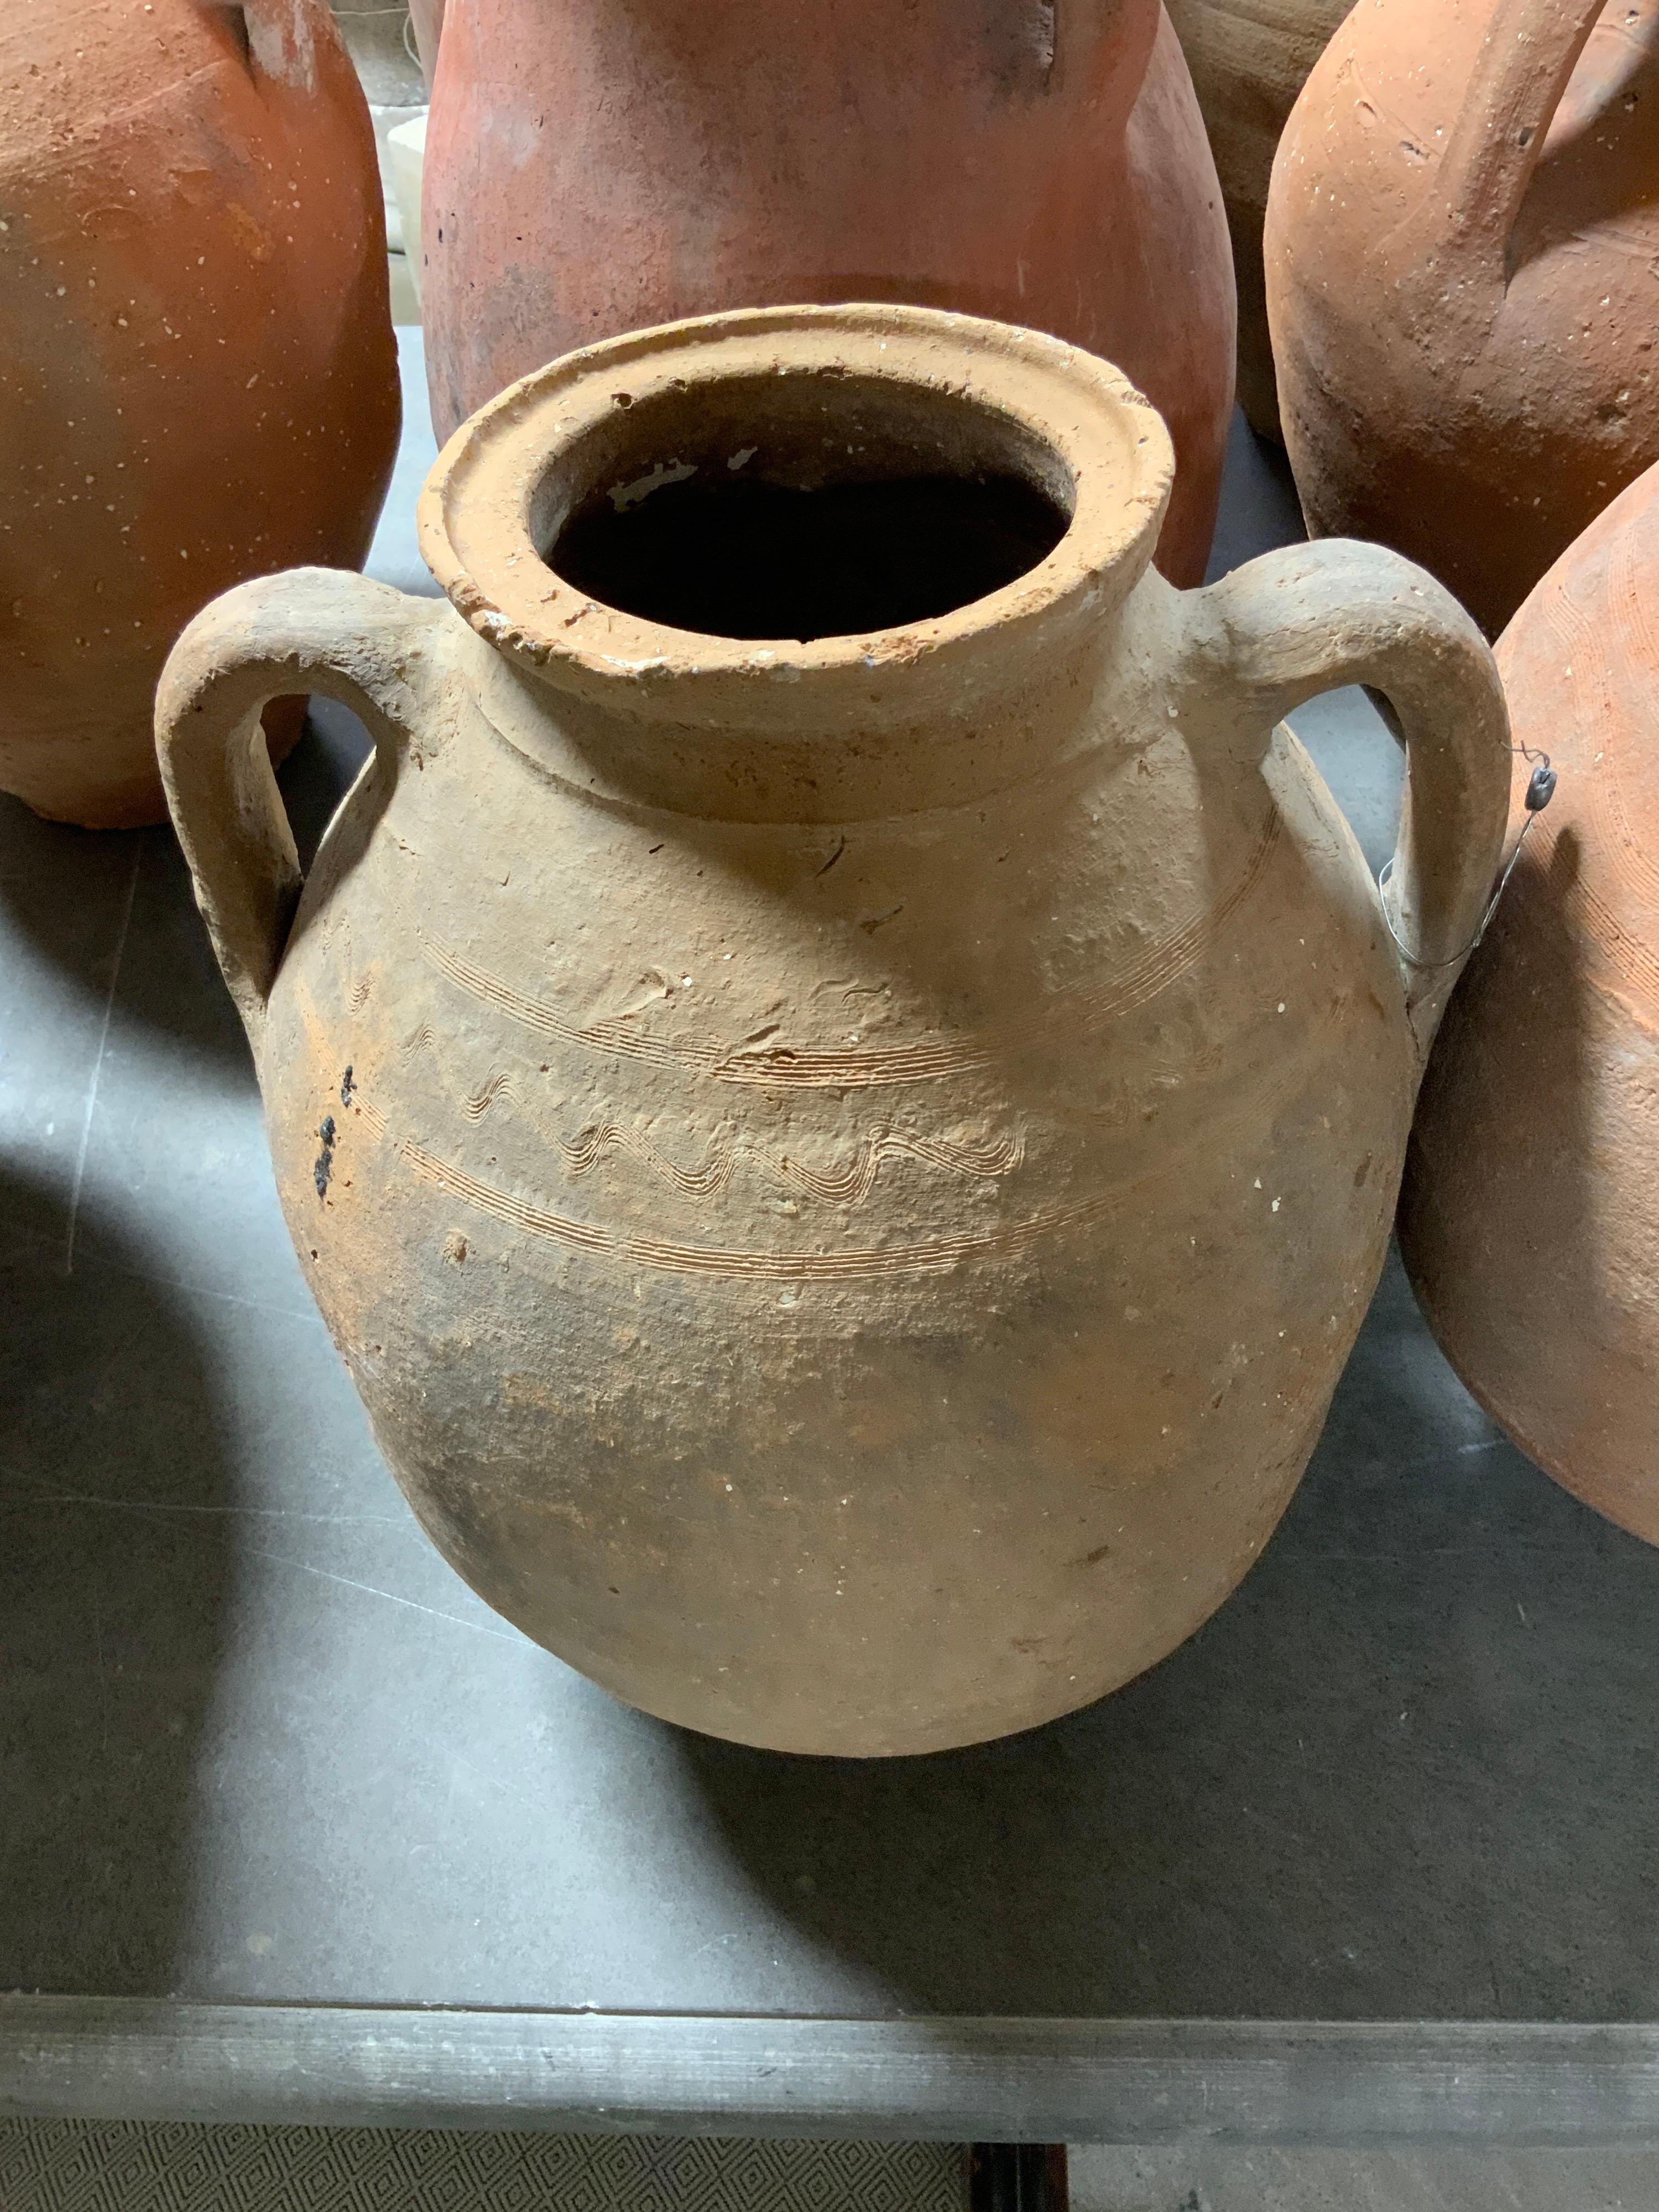 Gorgeous small terracotta water vessel, originates from Greece. Circa 1880s. Item is sold as individual. Dimensions outlined in image.